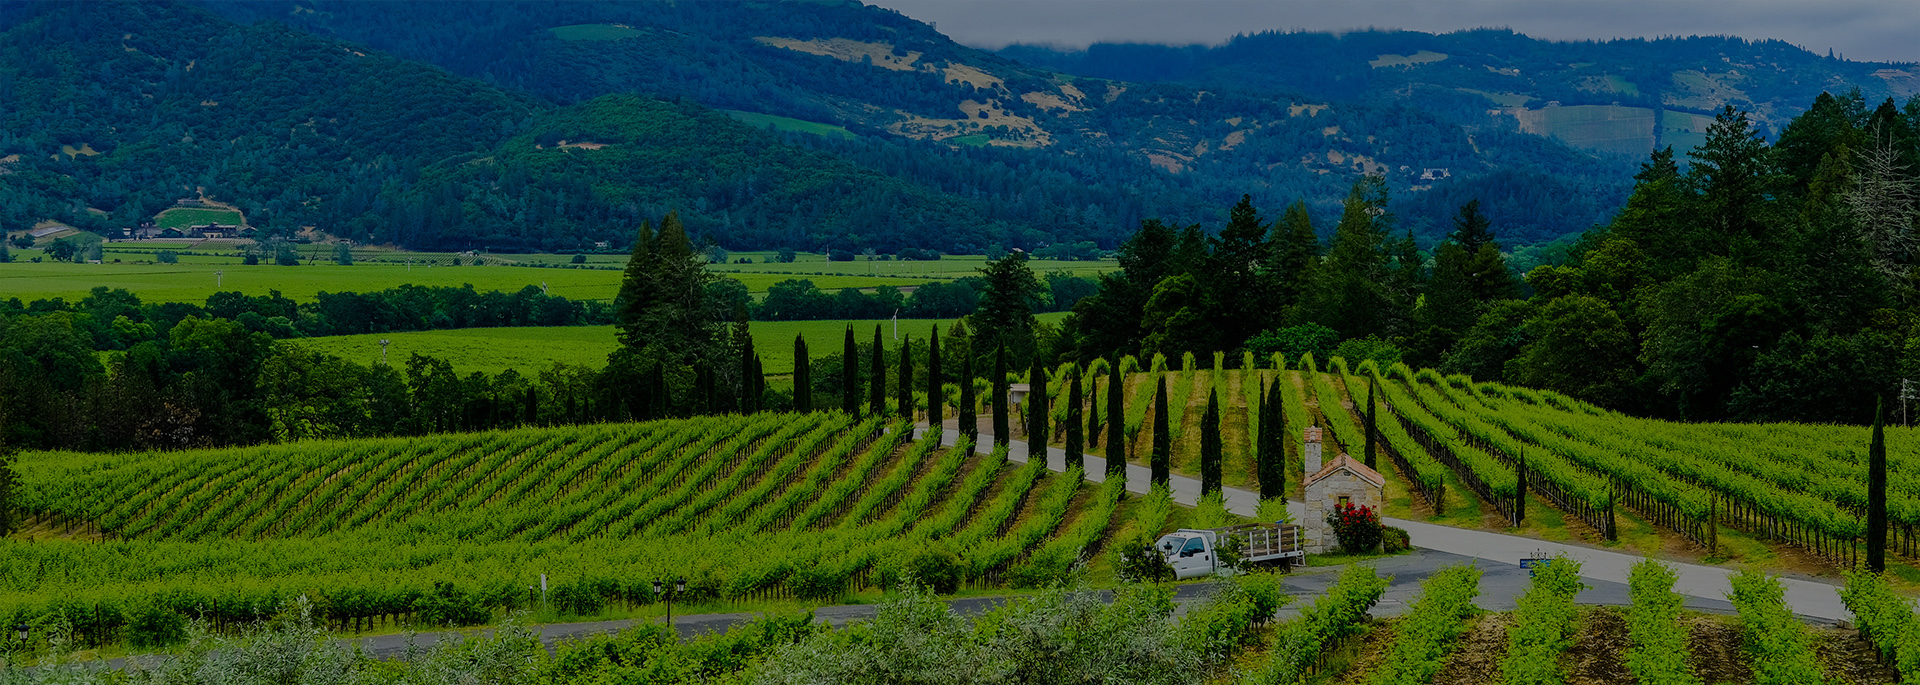 wide view of lush green winery vineyards and mountains in background